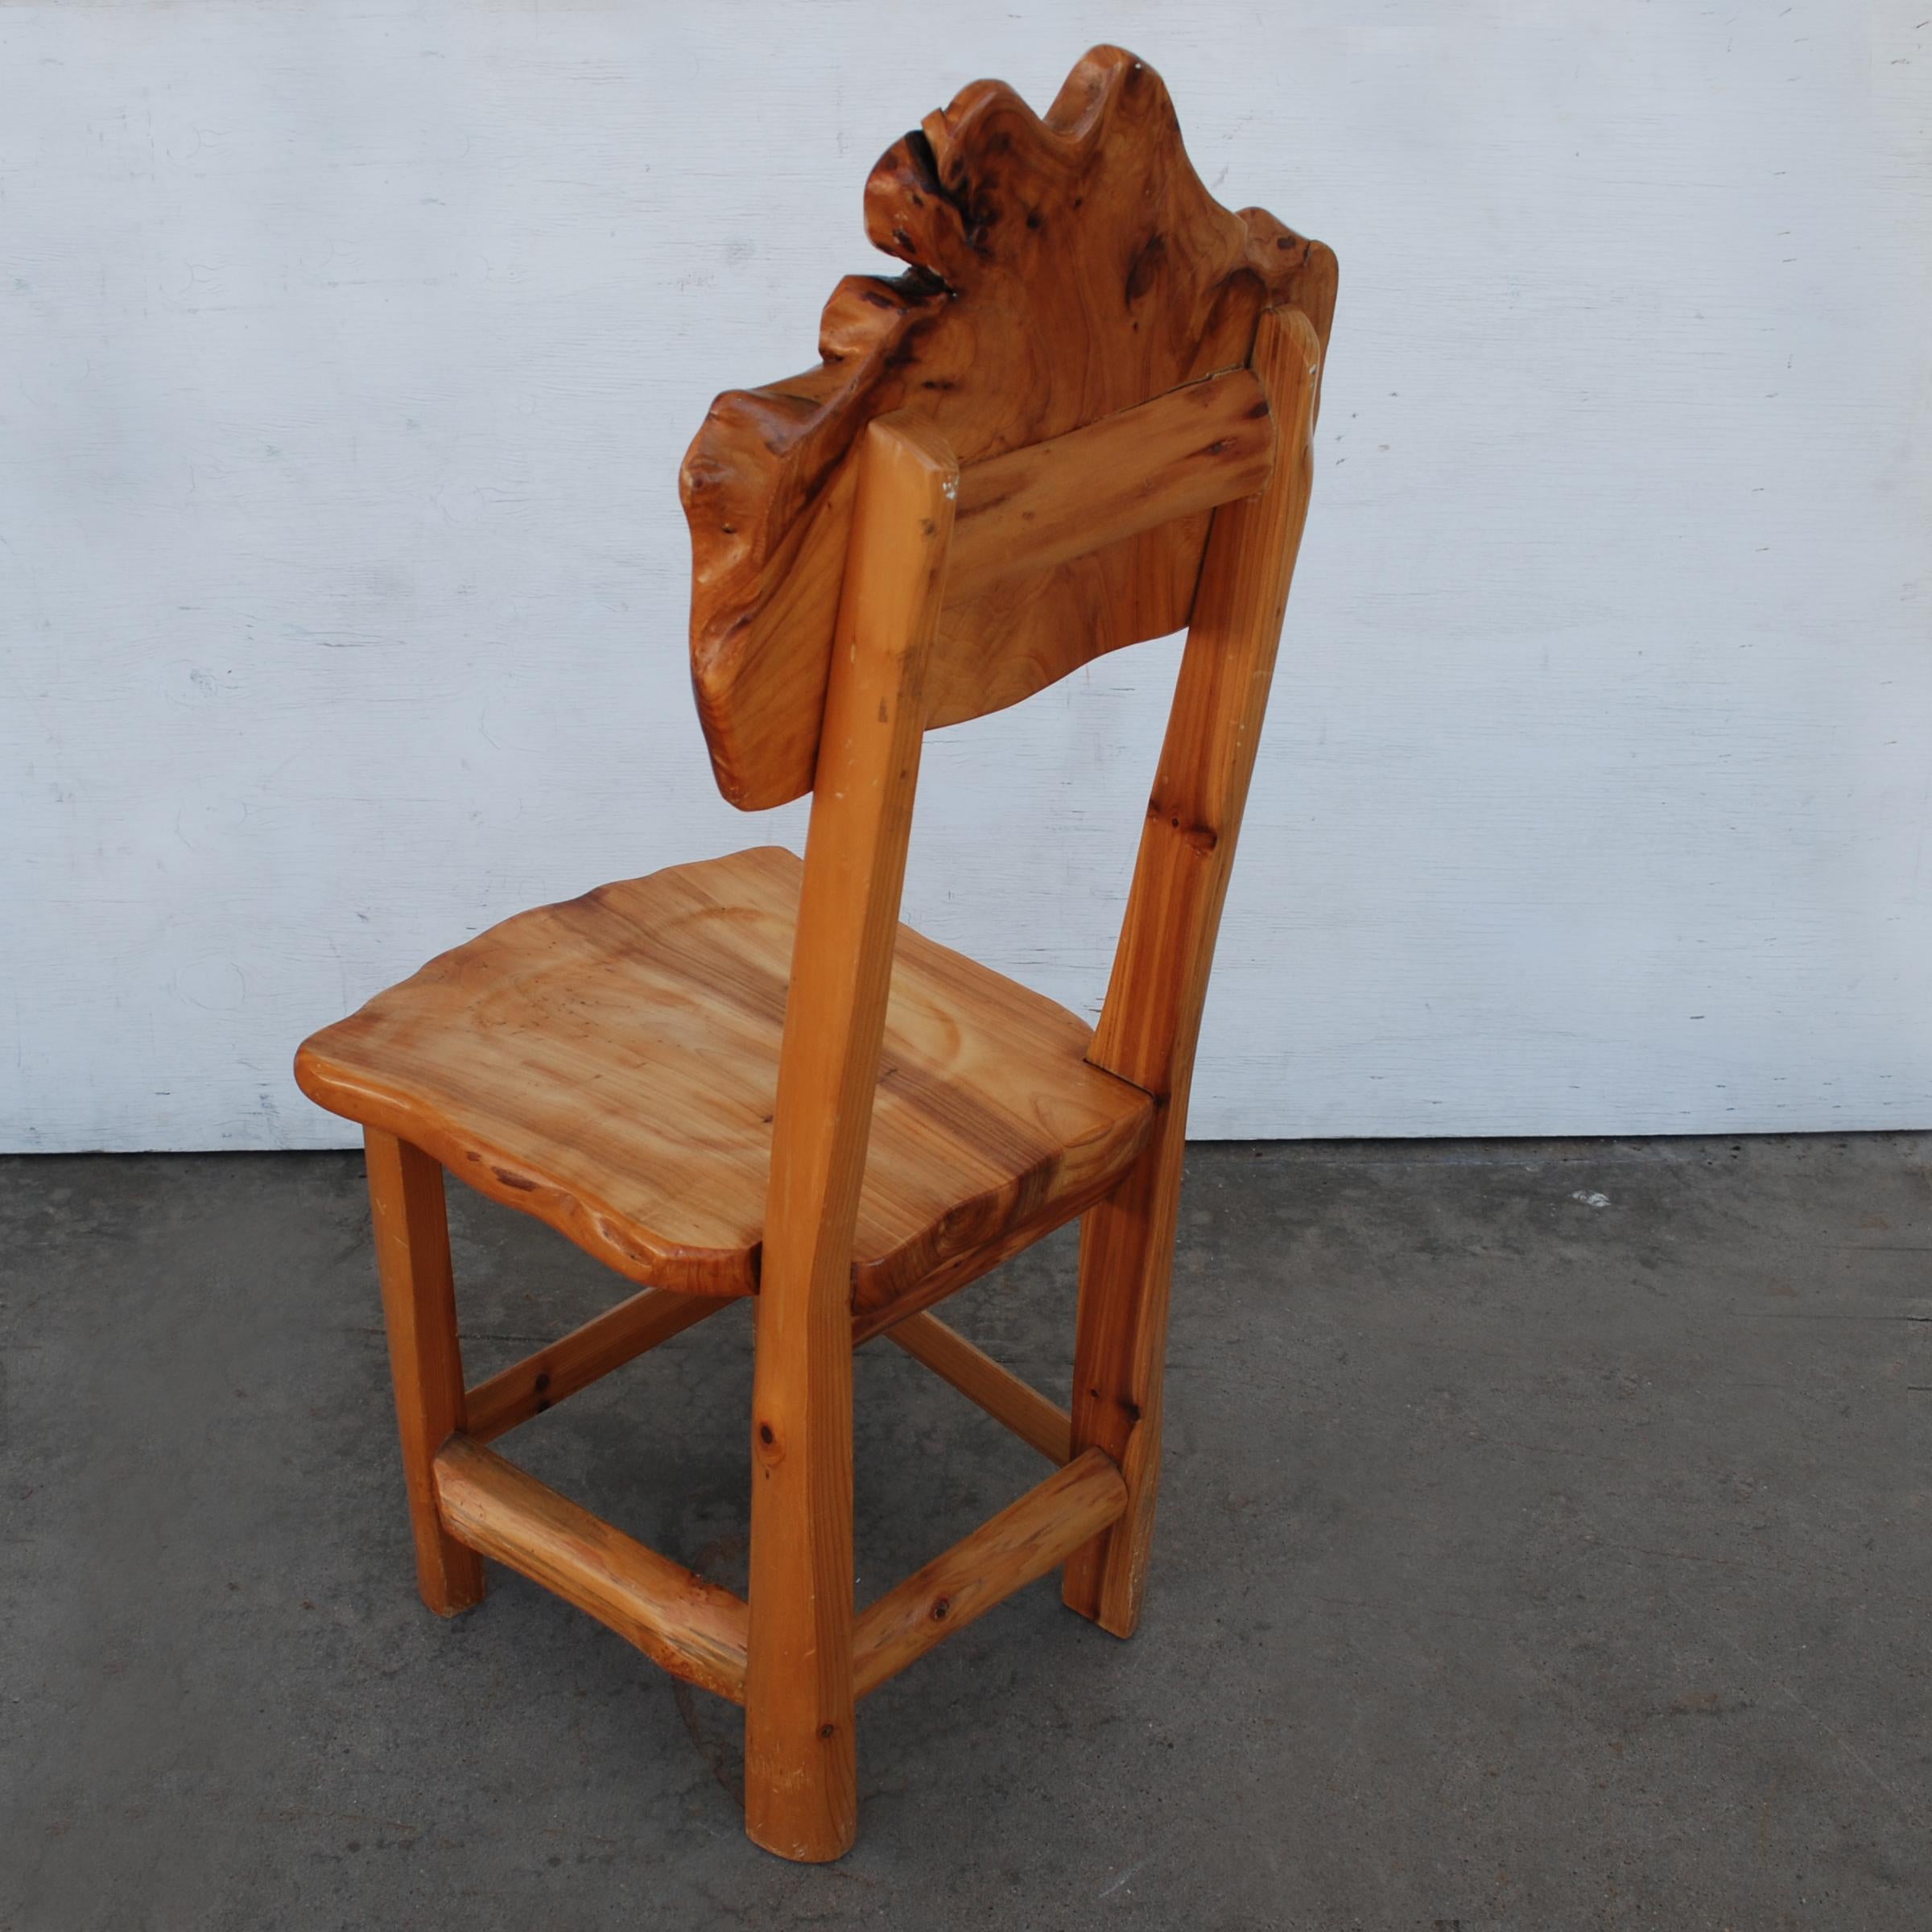 Live edge, organic freeform wood side chair

Chair is made from redwood trees, and has a very organic shape.